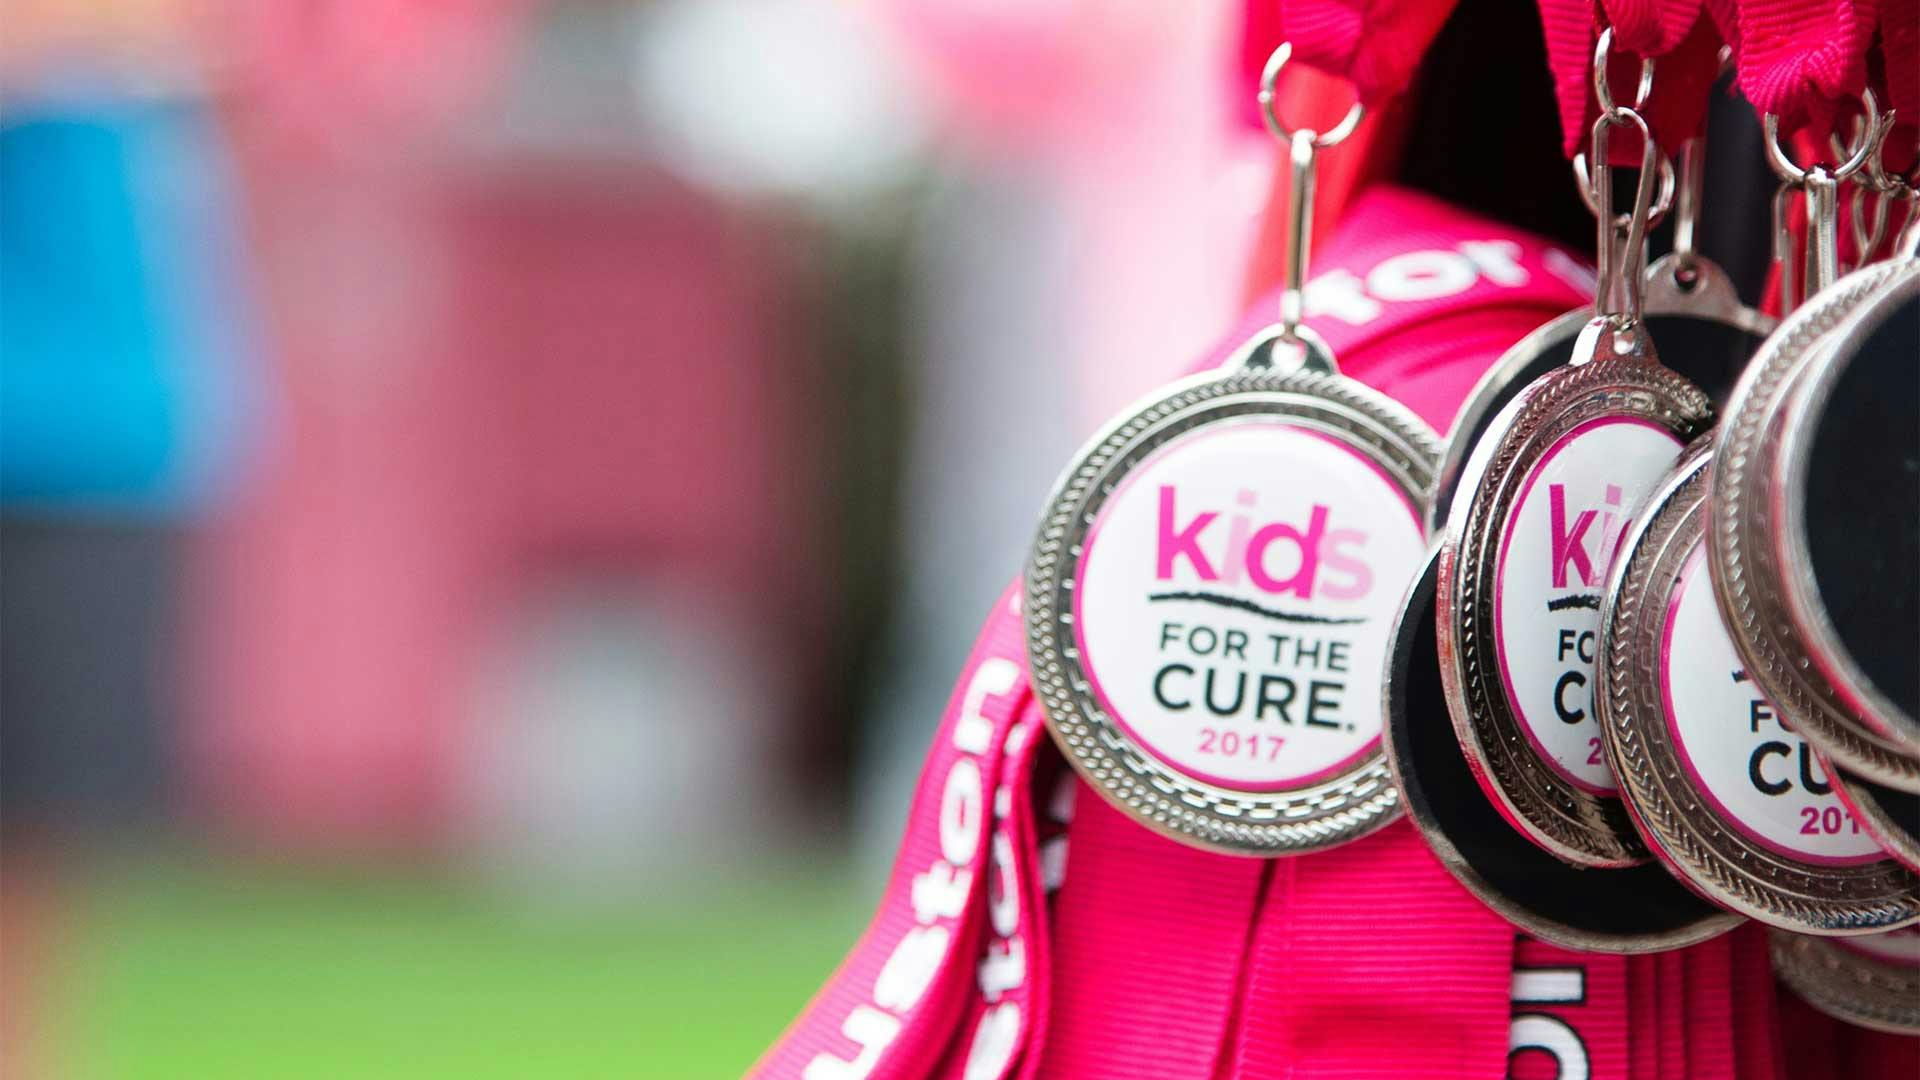 Close up of several Susan G Komen medals that say "Kids for the Cure 2017"